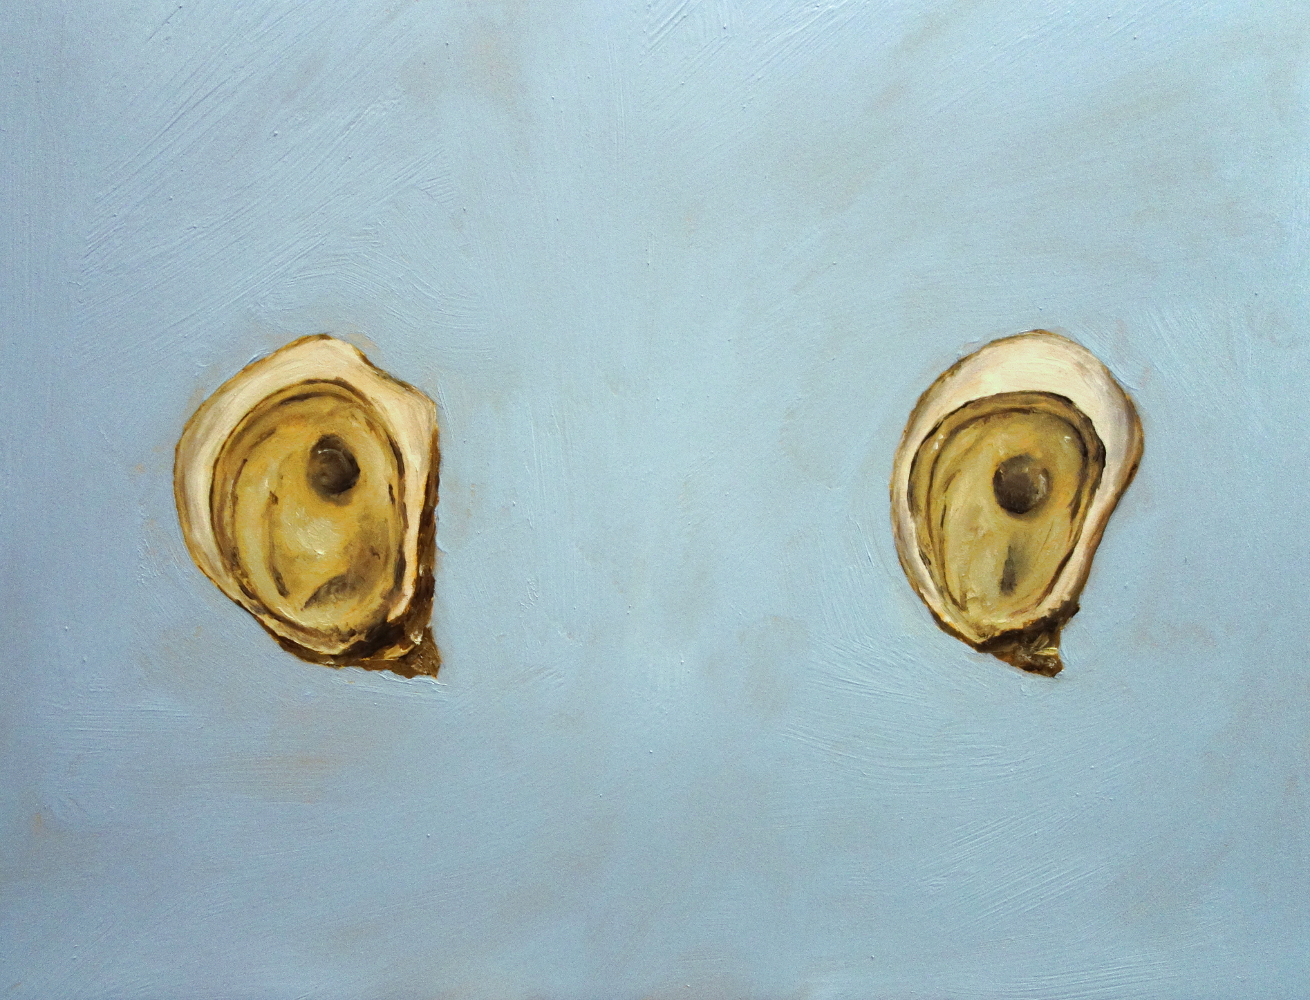 oil painting on panel of two oysters